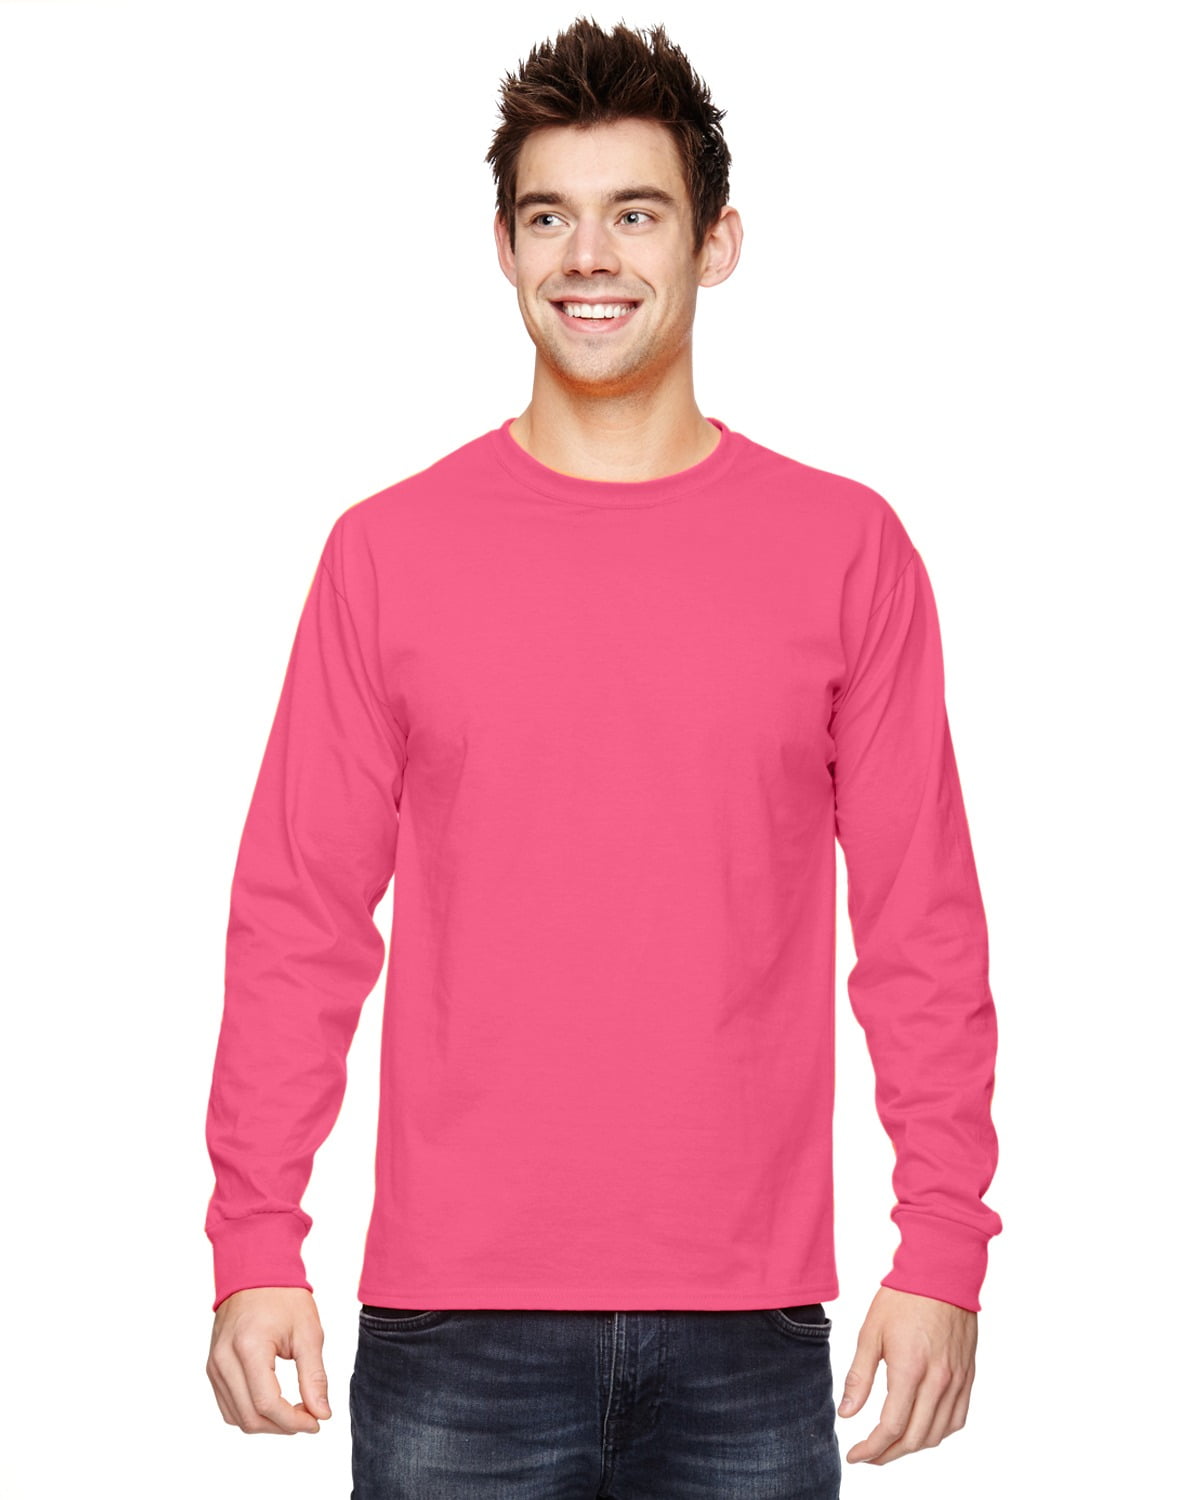 Fruit Of The Loom 4930 Hd Cotton 100 Cotton Long Sleeve T-Shirt